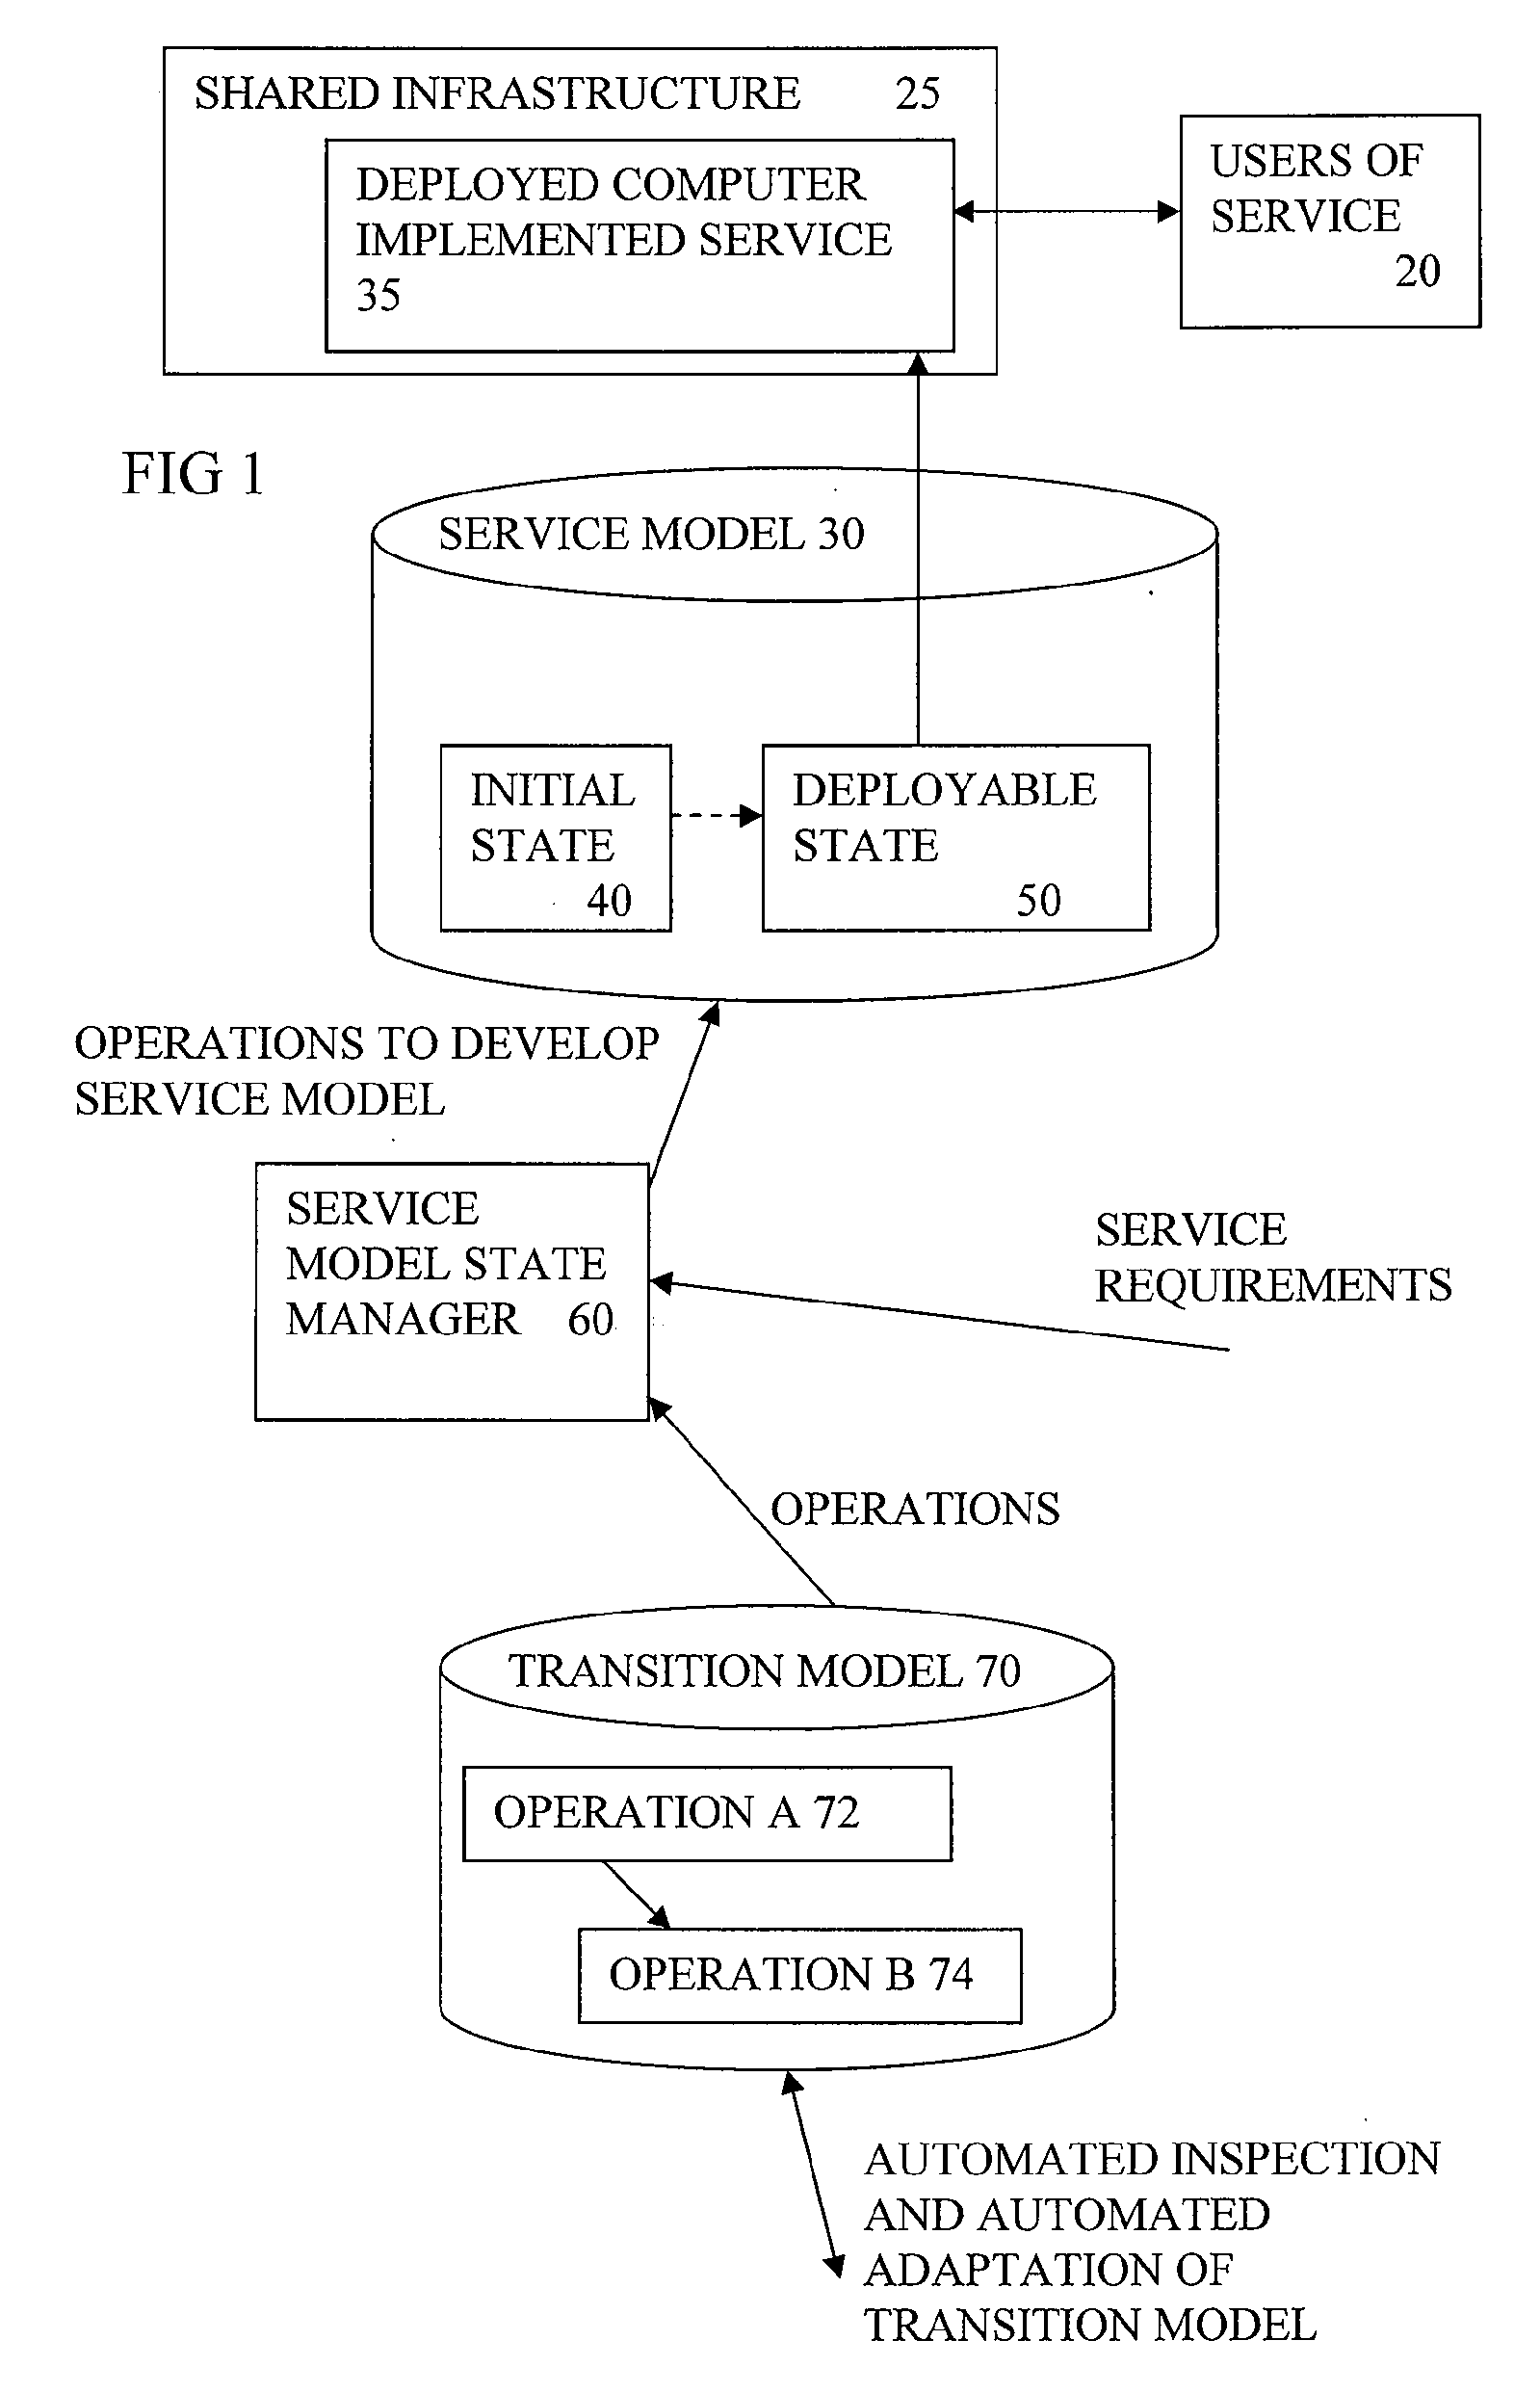 Automated Lifecycle Management of a Computer Implemented Service